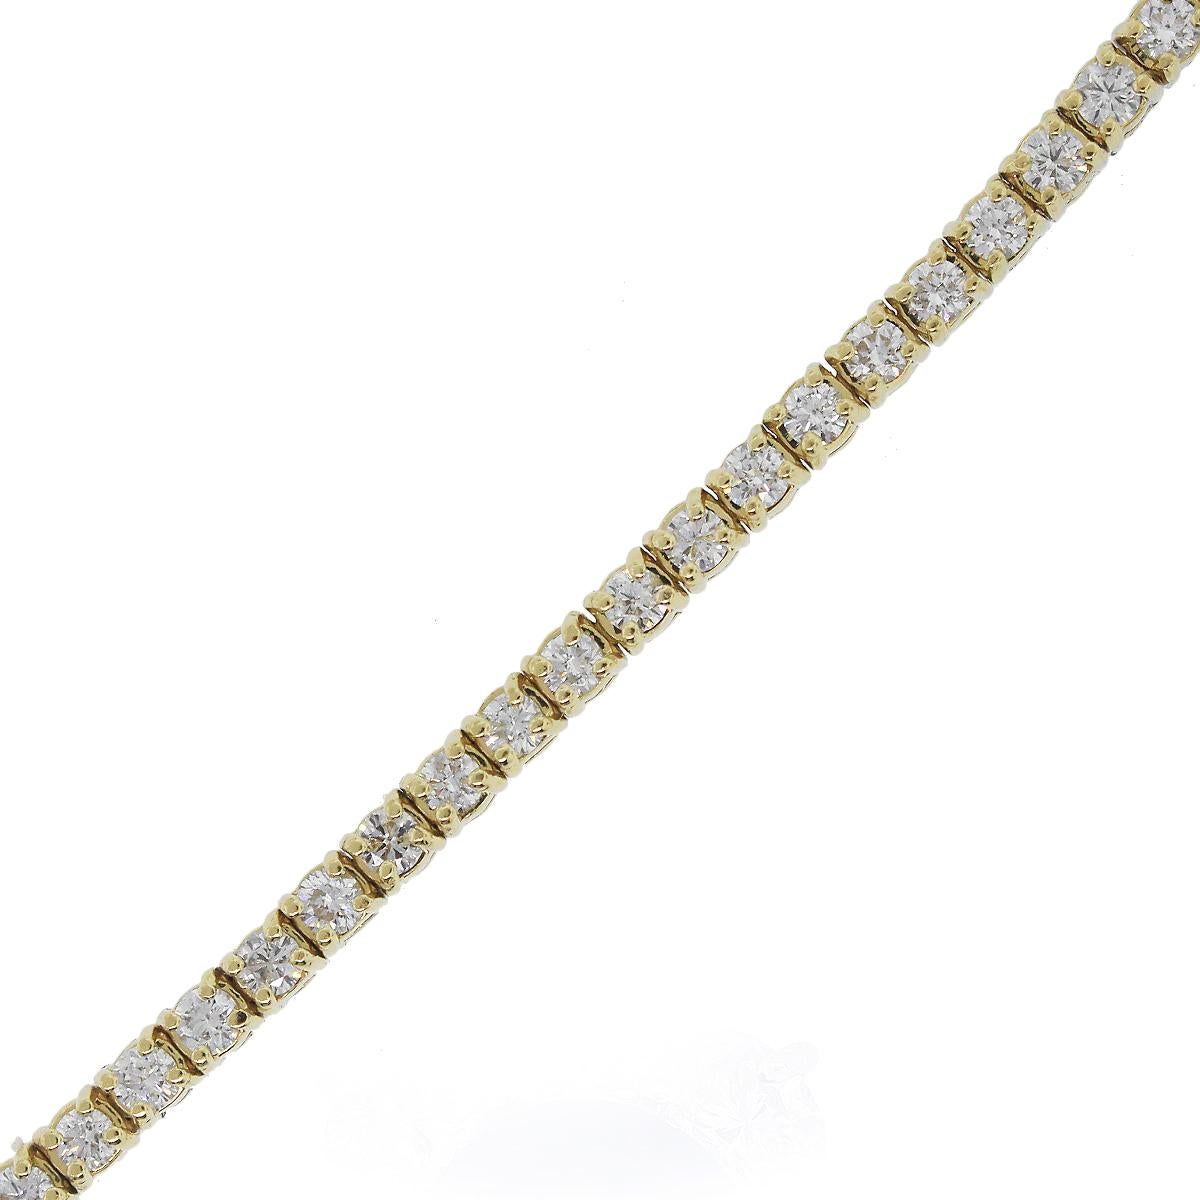 Material: 14k Yellow Gold
Diamond Details: Approximately 3ctw round brilliant diamonds. Diamonds are J in color and SI1 in clarity.
Clasp: Tongue in box clasp with safety latch
Total Weight: 16.2g (10.4dwt)
Length: 6.5